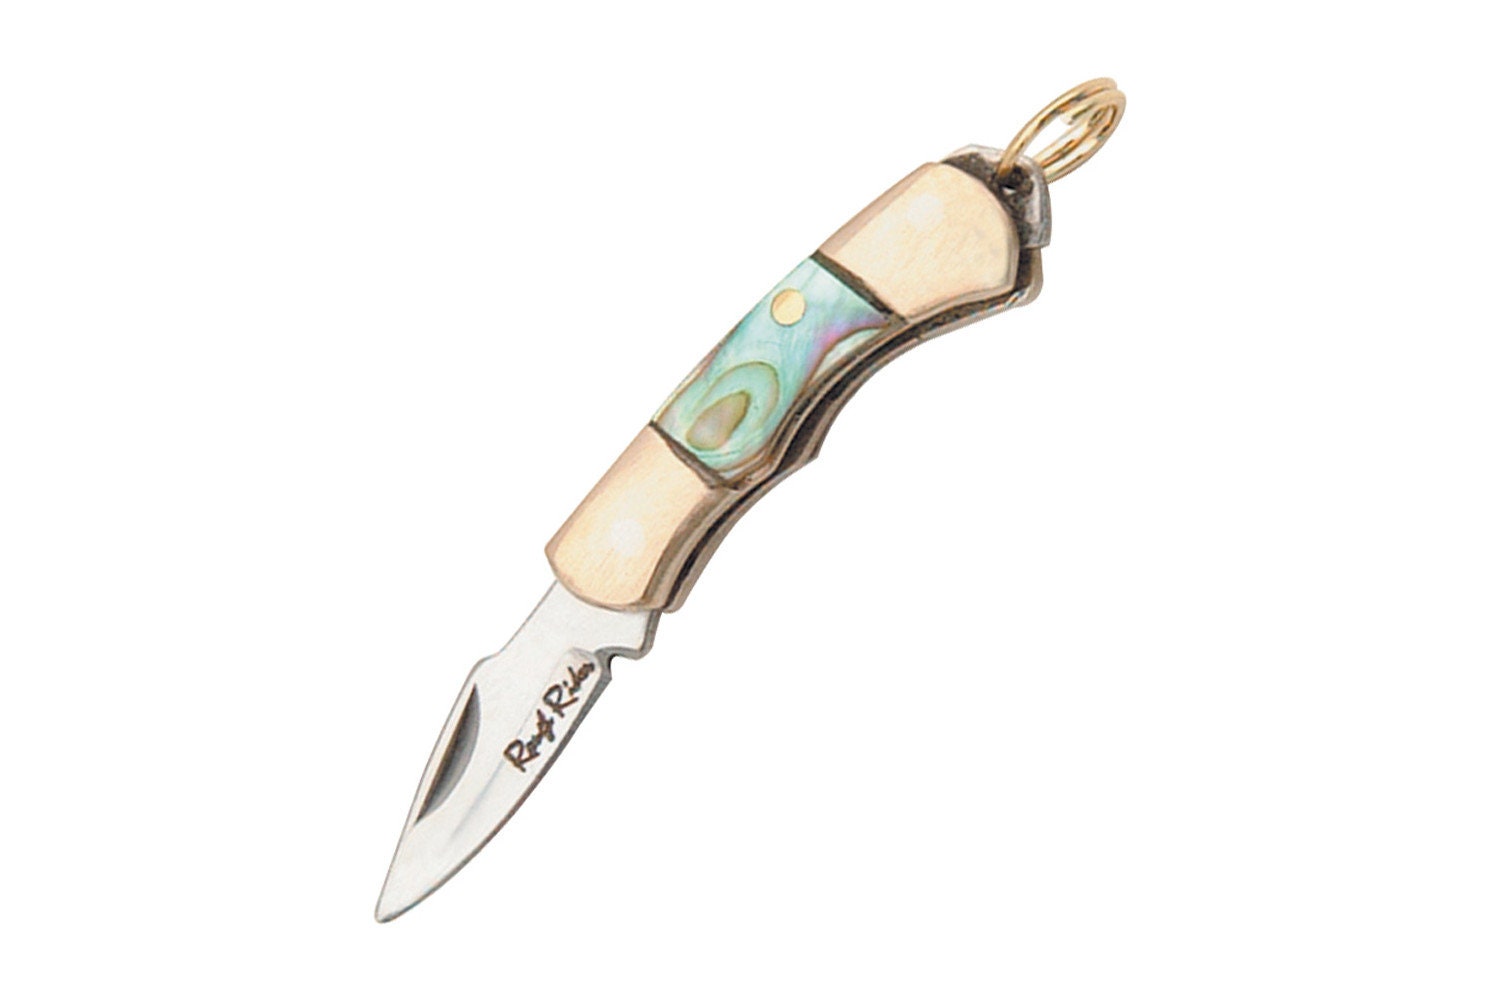 Rough Rider Yellow Riggers Marlin Spike Knife